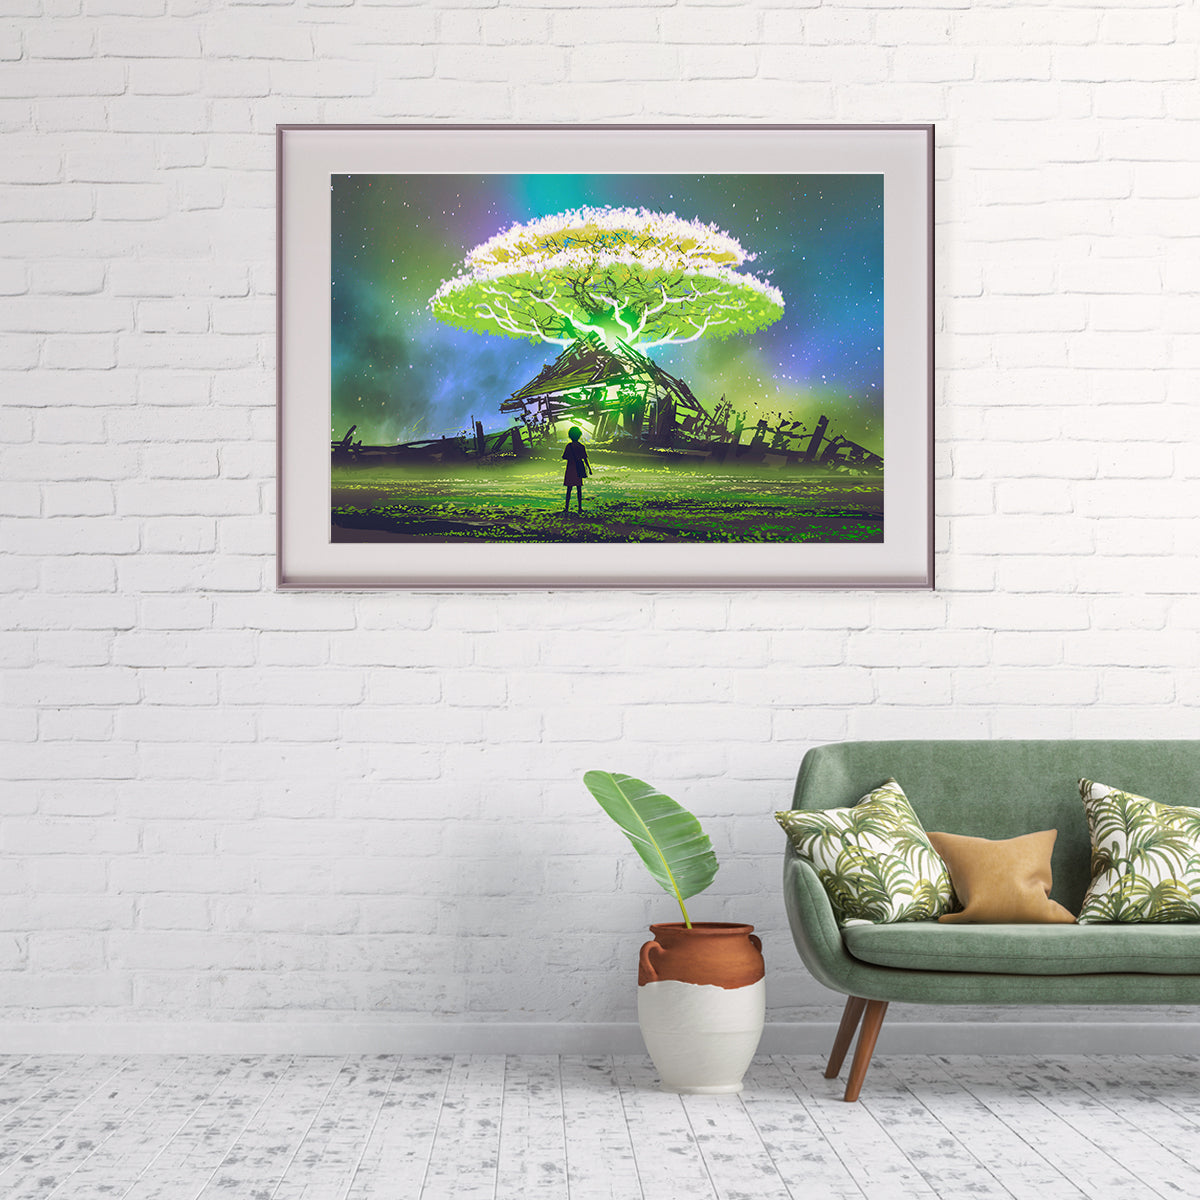 Glowing Tree Contemporary Art Prints Posters-Horizontal Posters NOT FRAMED-CetArt-10″x8″ inches-CetArt